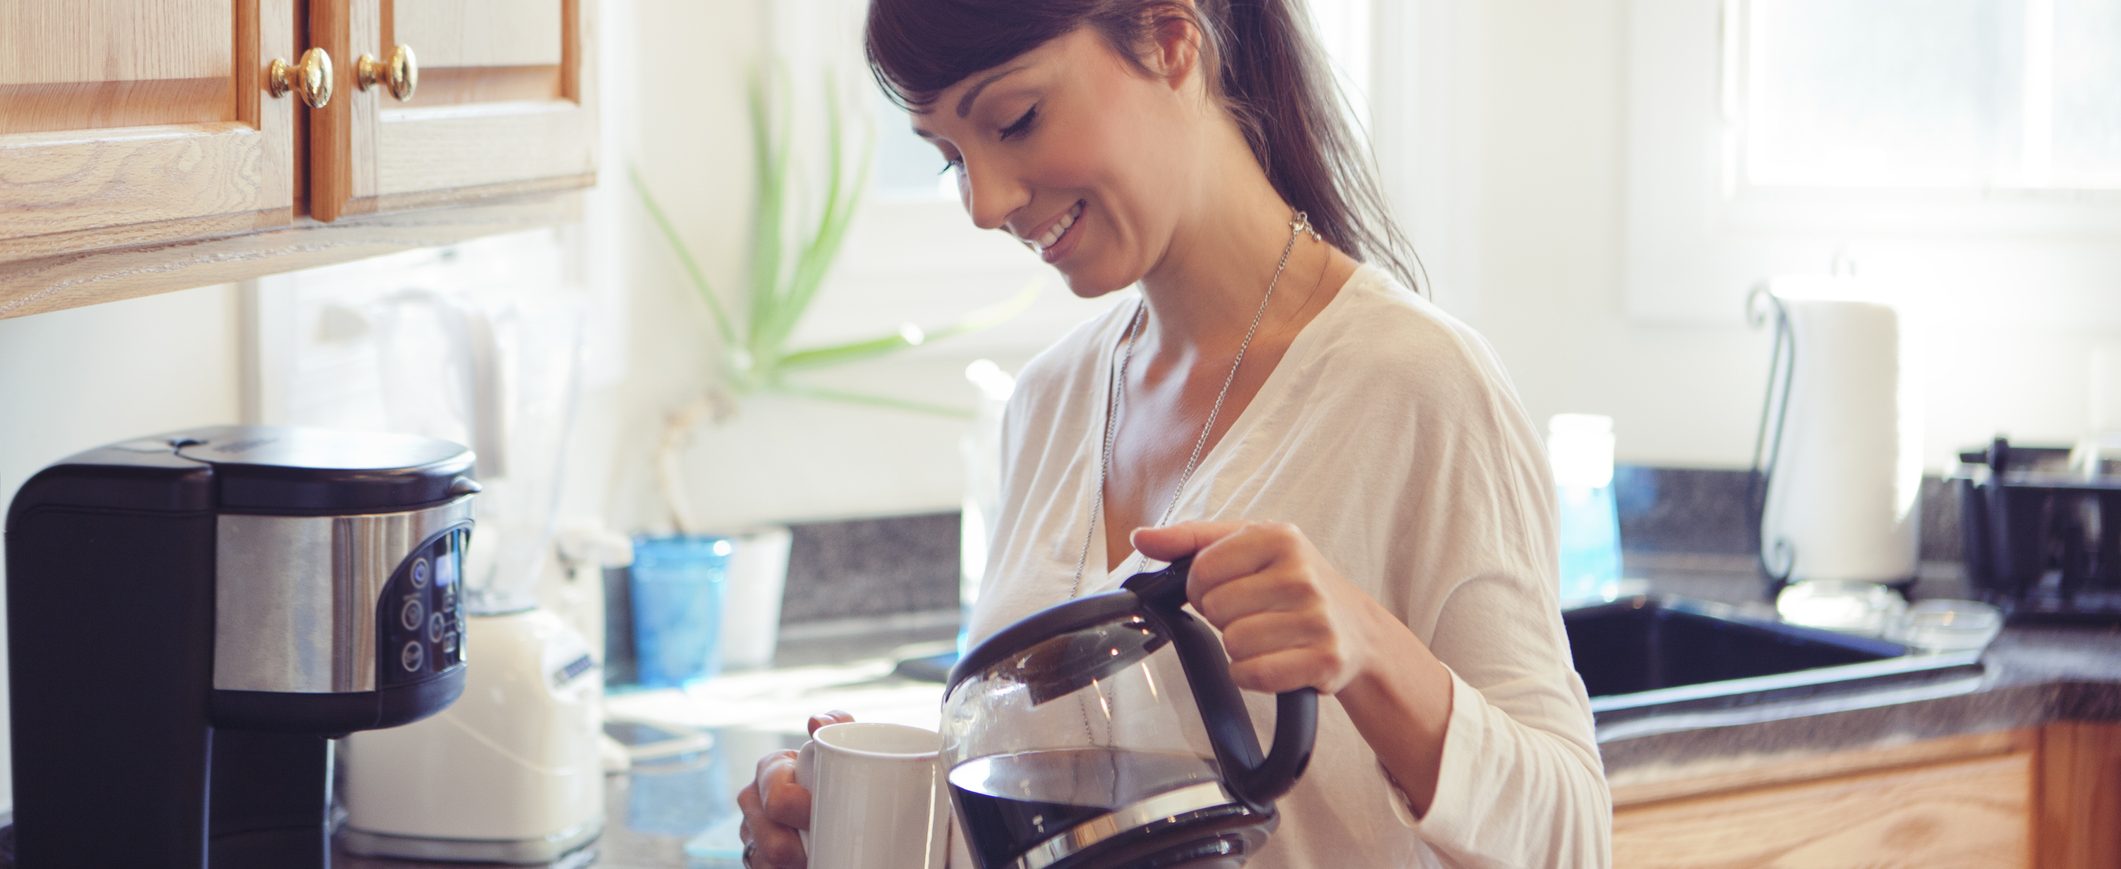 Making coffee at home is an easy way to cut back on your daily spending